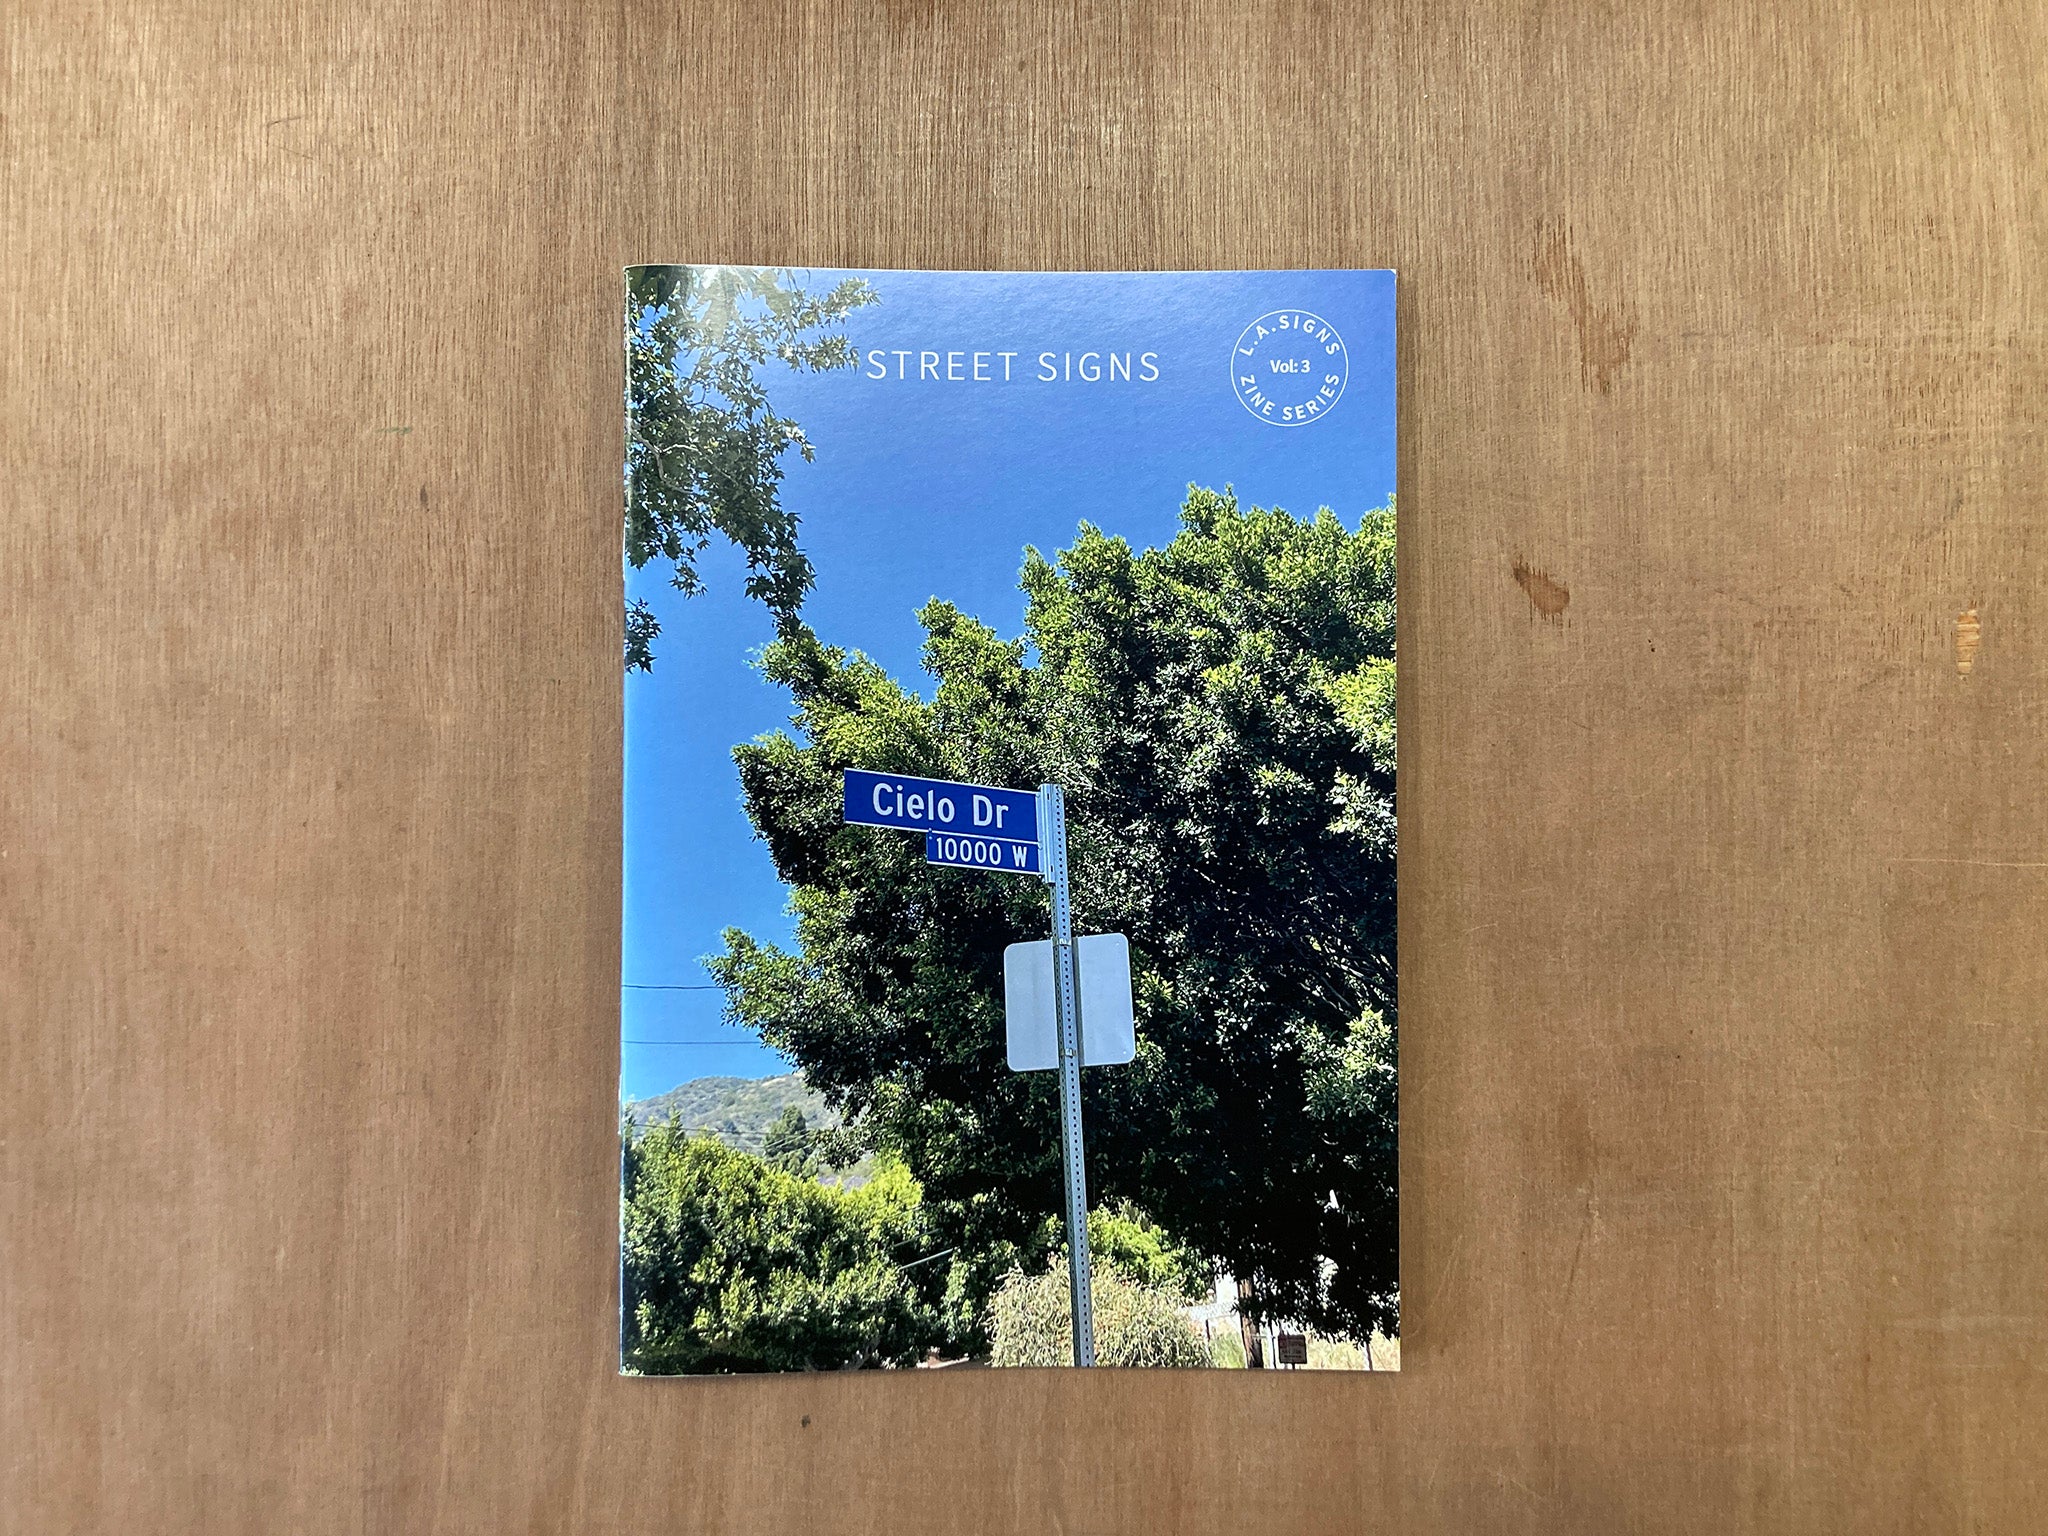 L.A. SIGNS ZINE SERIES: STREET SIGNS by Paul Price